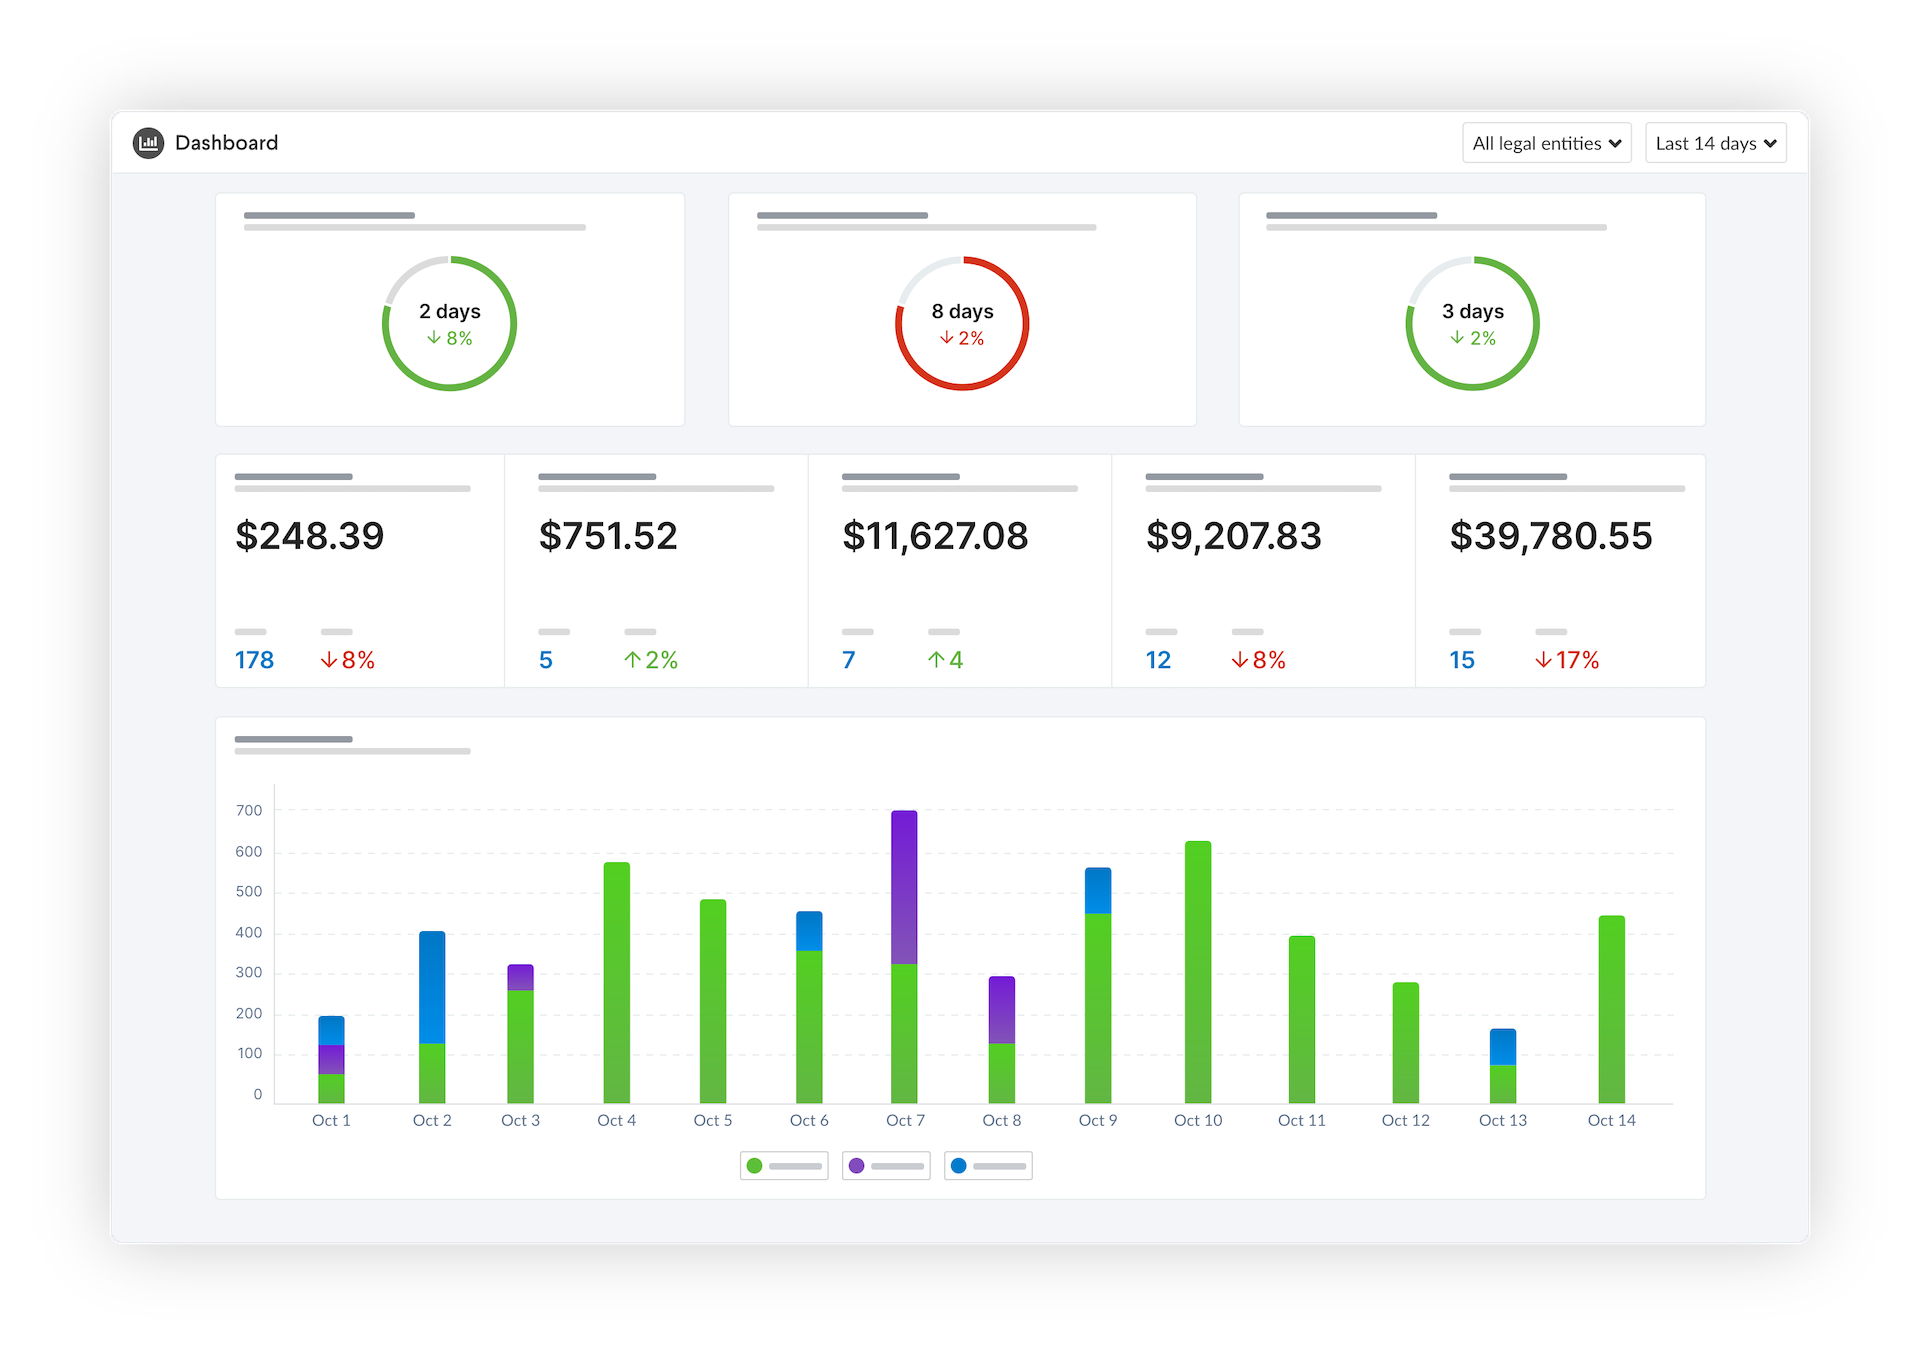 Quadient Accounts Payable Automation Software - Real time insights into your AP position with dashboards Get a detailed and more clear picture of your AP position and monitor workflow efficiencies.